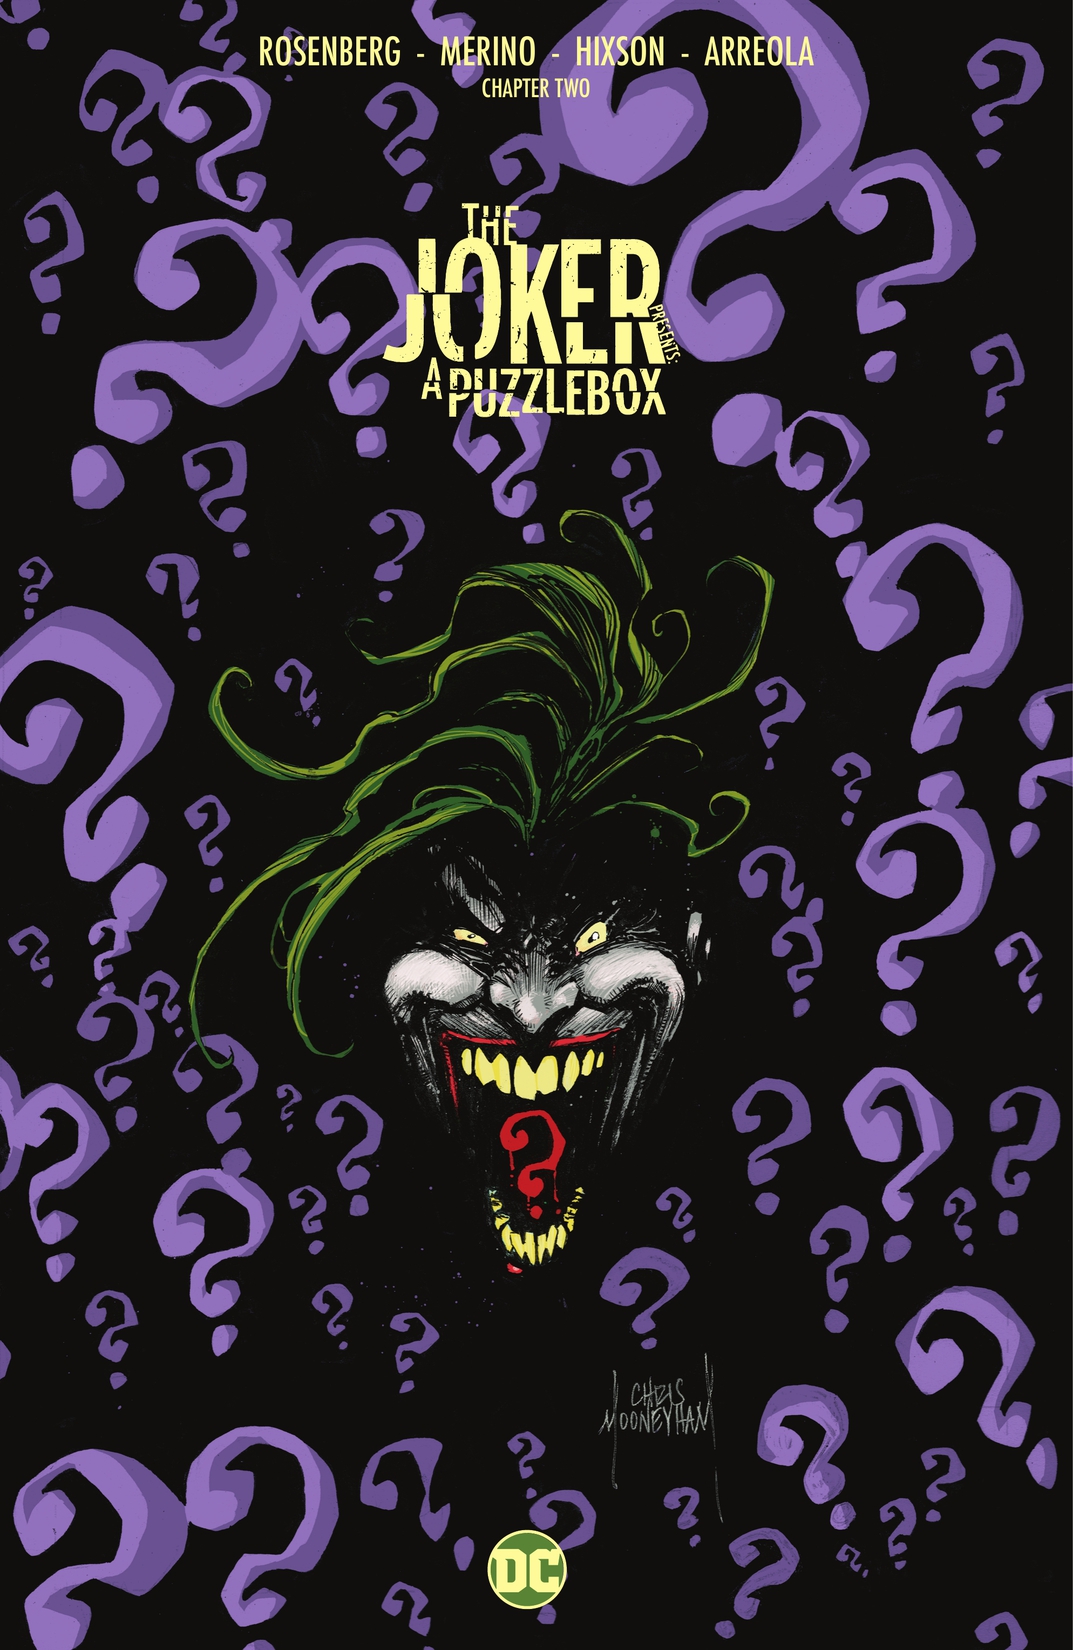 The Joker Presents: A Puzzlebox Director's Cut #2 preview images